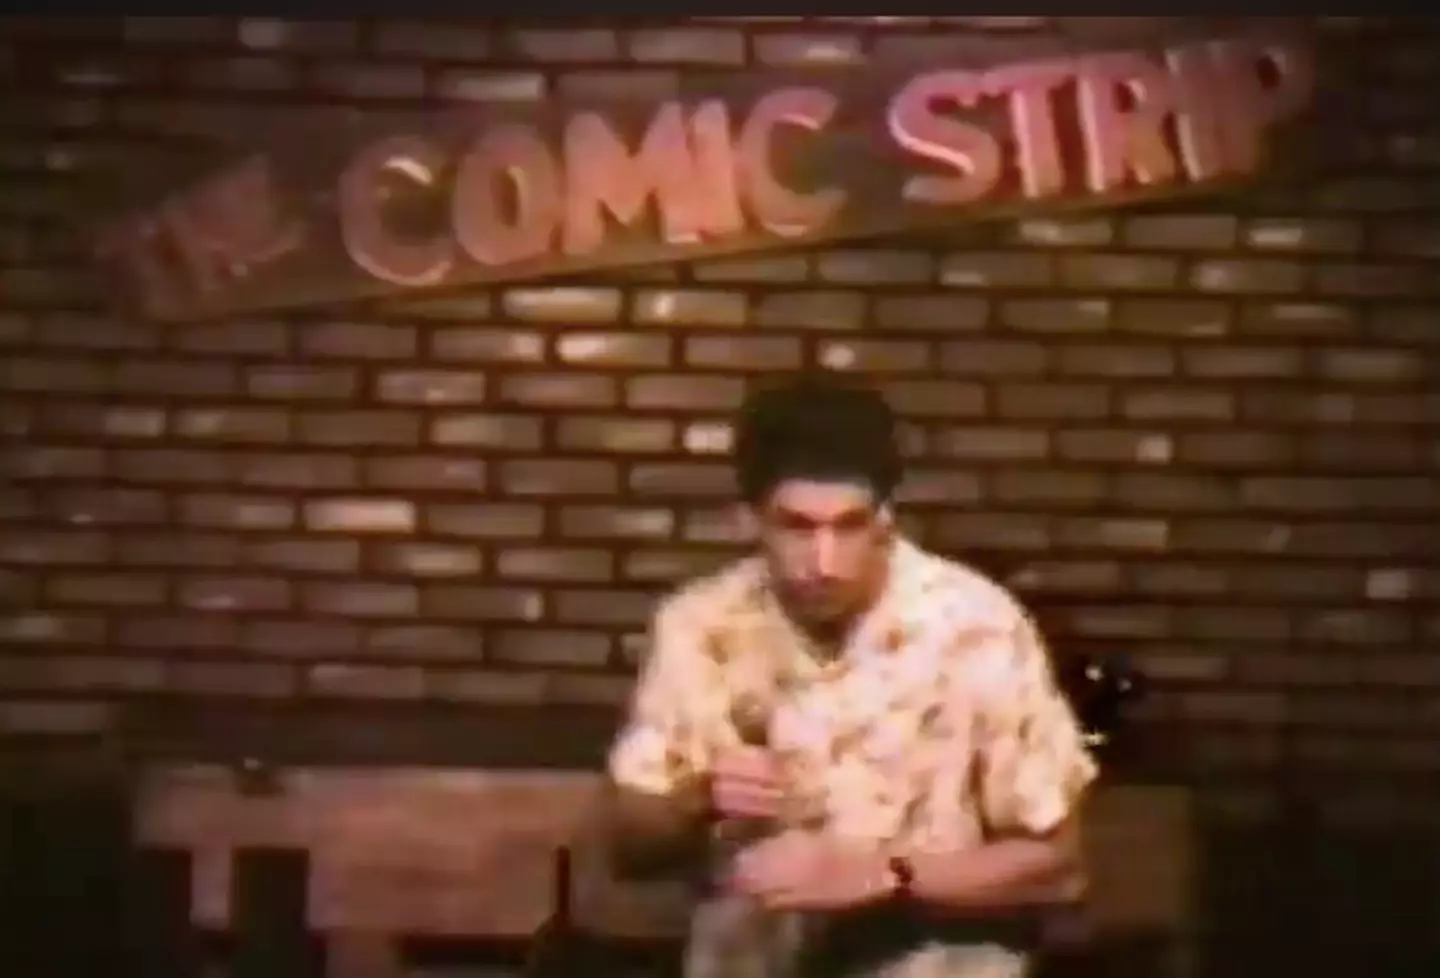 The grainy footage shows Sandler at the beginning of his career.